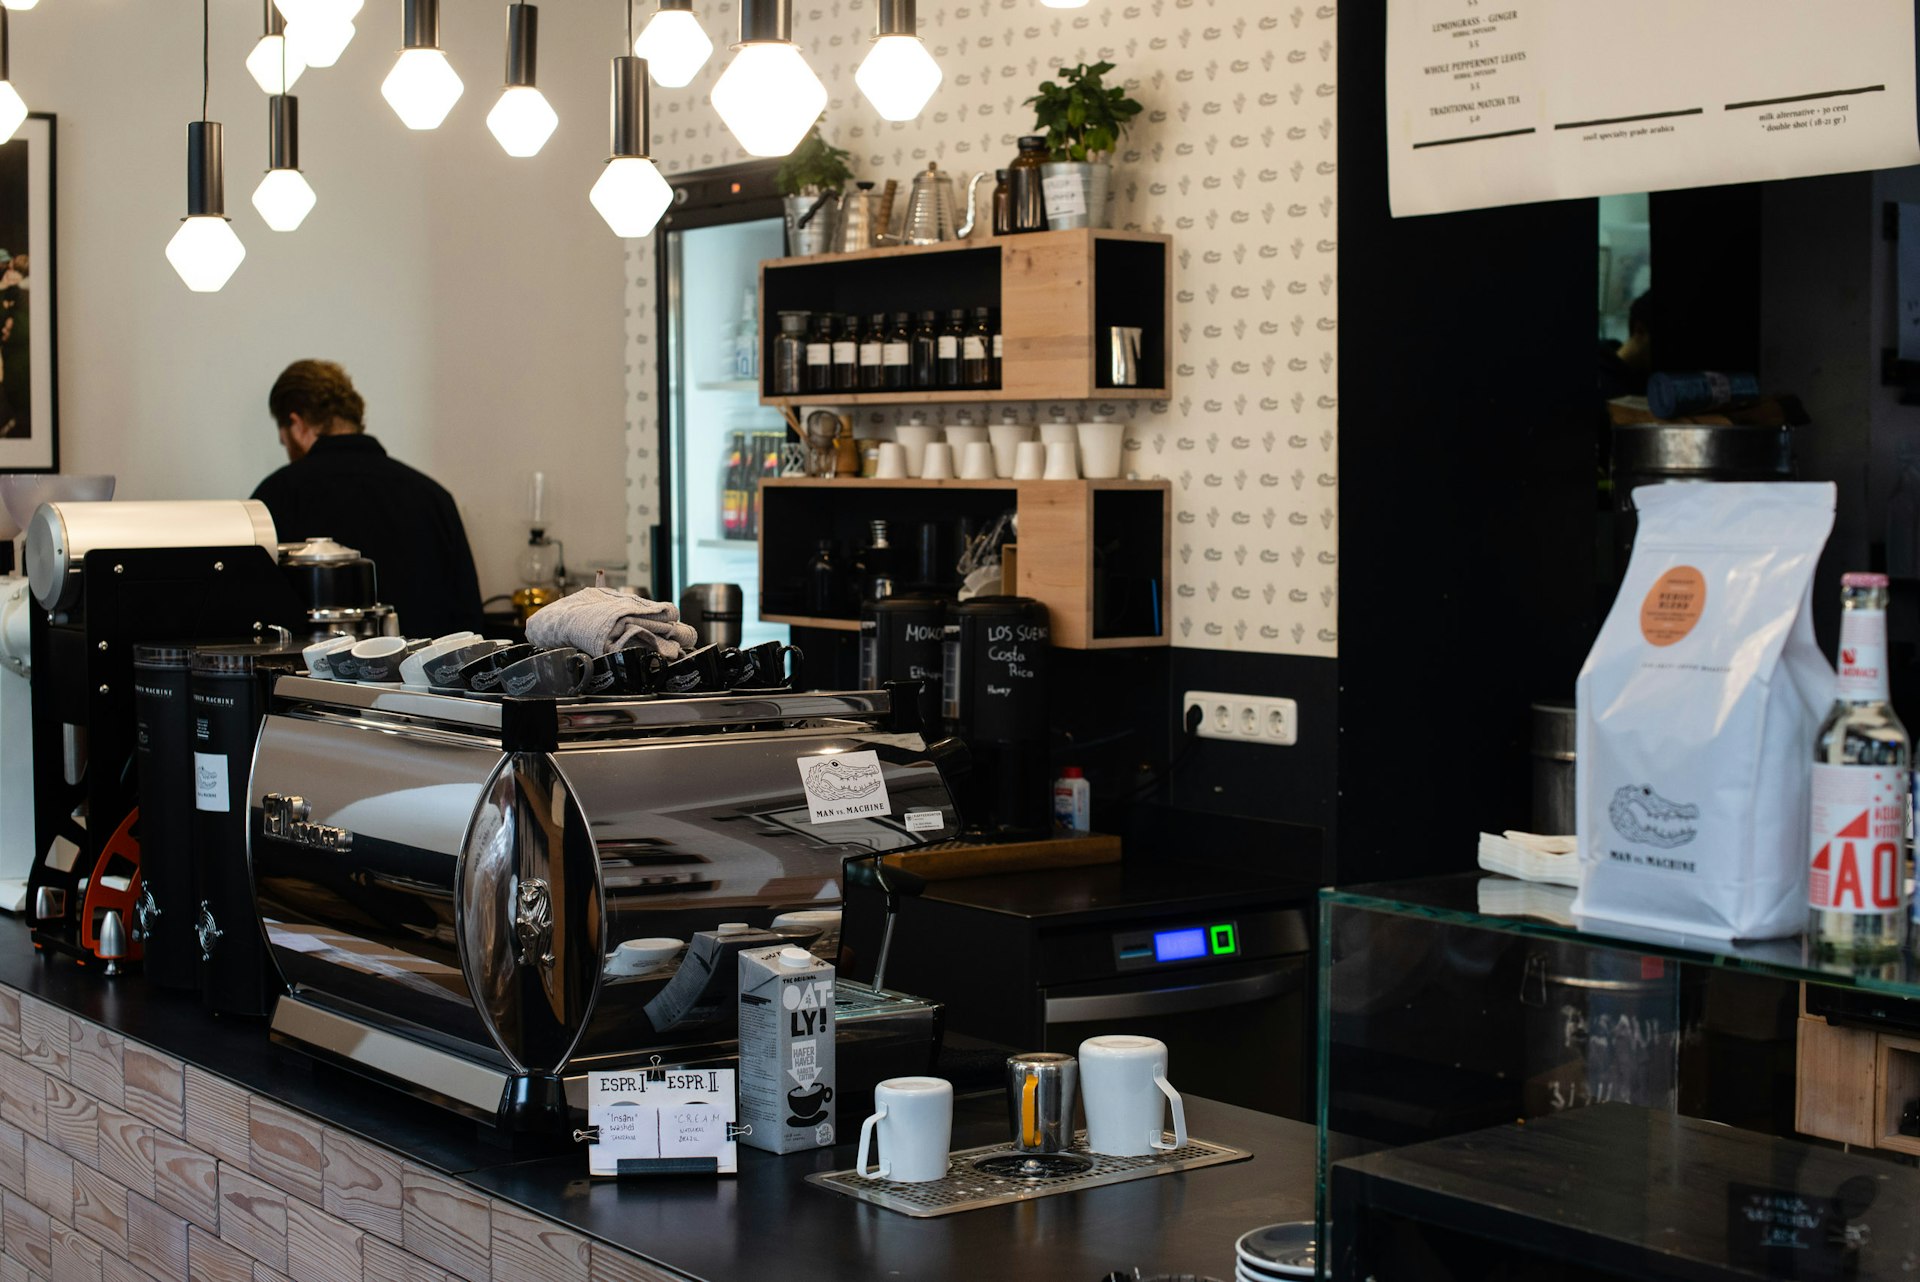 The stylish interior of Man Versus Machine cafe in Munich. A barista faces away from the camera, surrounded by gleaming chrome coffee makers and appliances. Funky, geometric light features hang from the roof. © Kate Mann / Lonely Planet